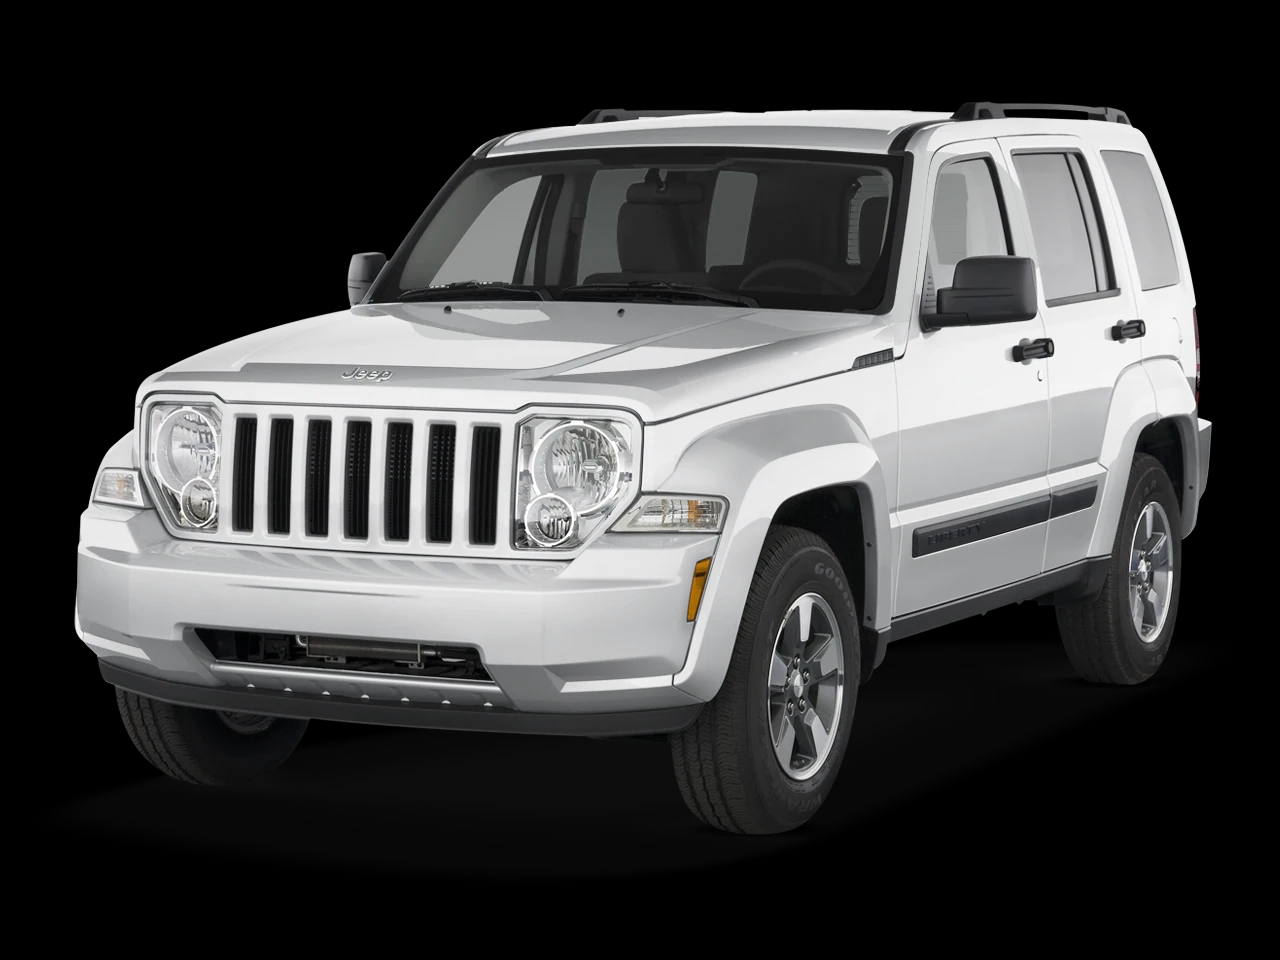 Should You Take the 2012 Jeep Liberty Off Road? | GetJerry.com